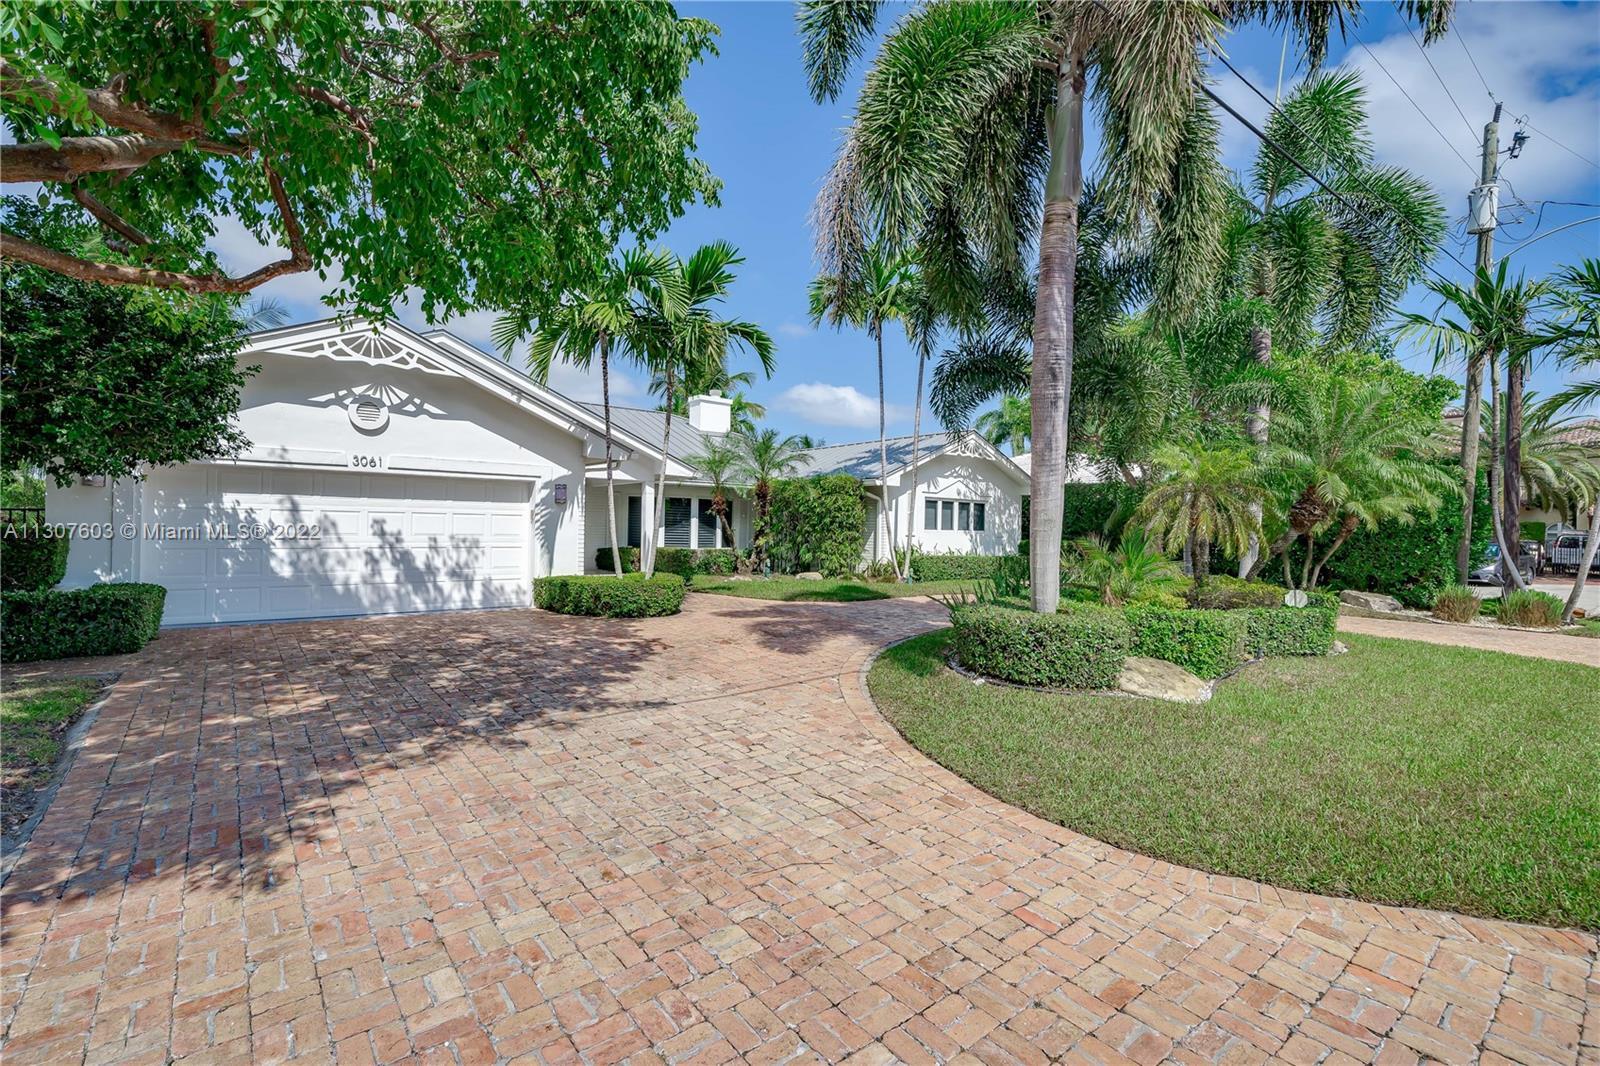 LOCATION.LOCATION. Boat lovers,golfers and family dream home. Walking distance to Fort Lauderdale Co